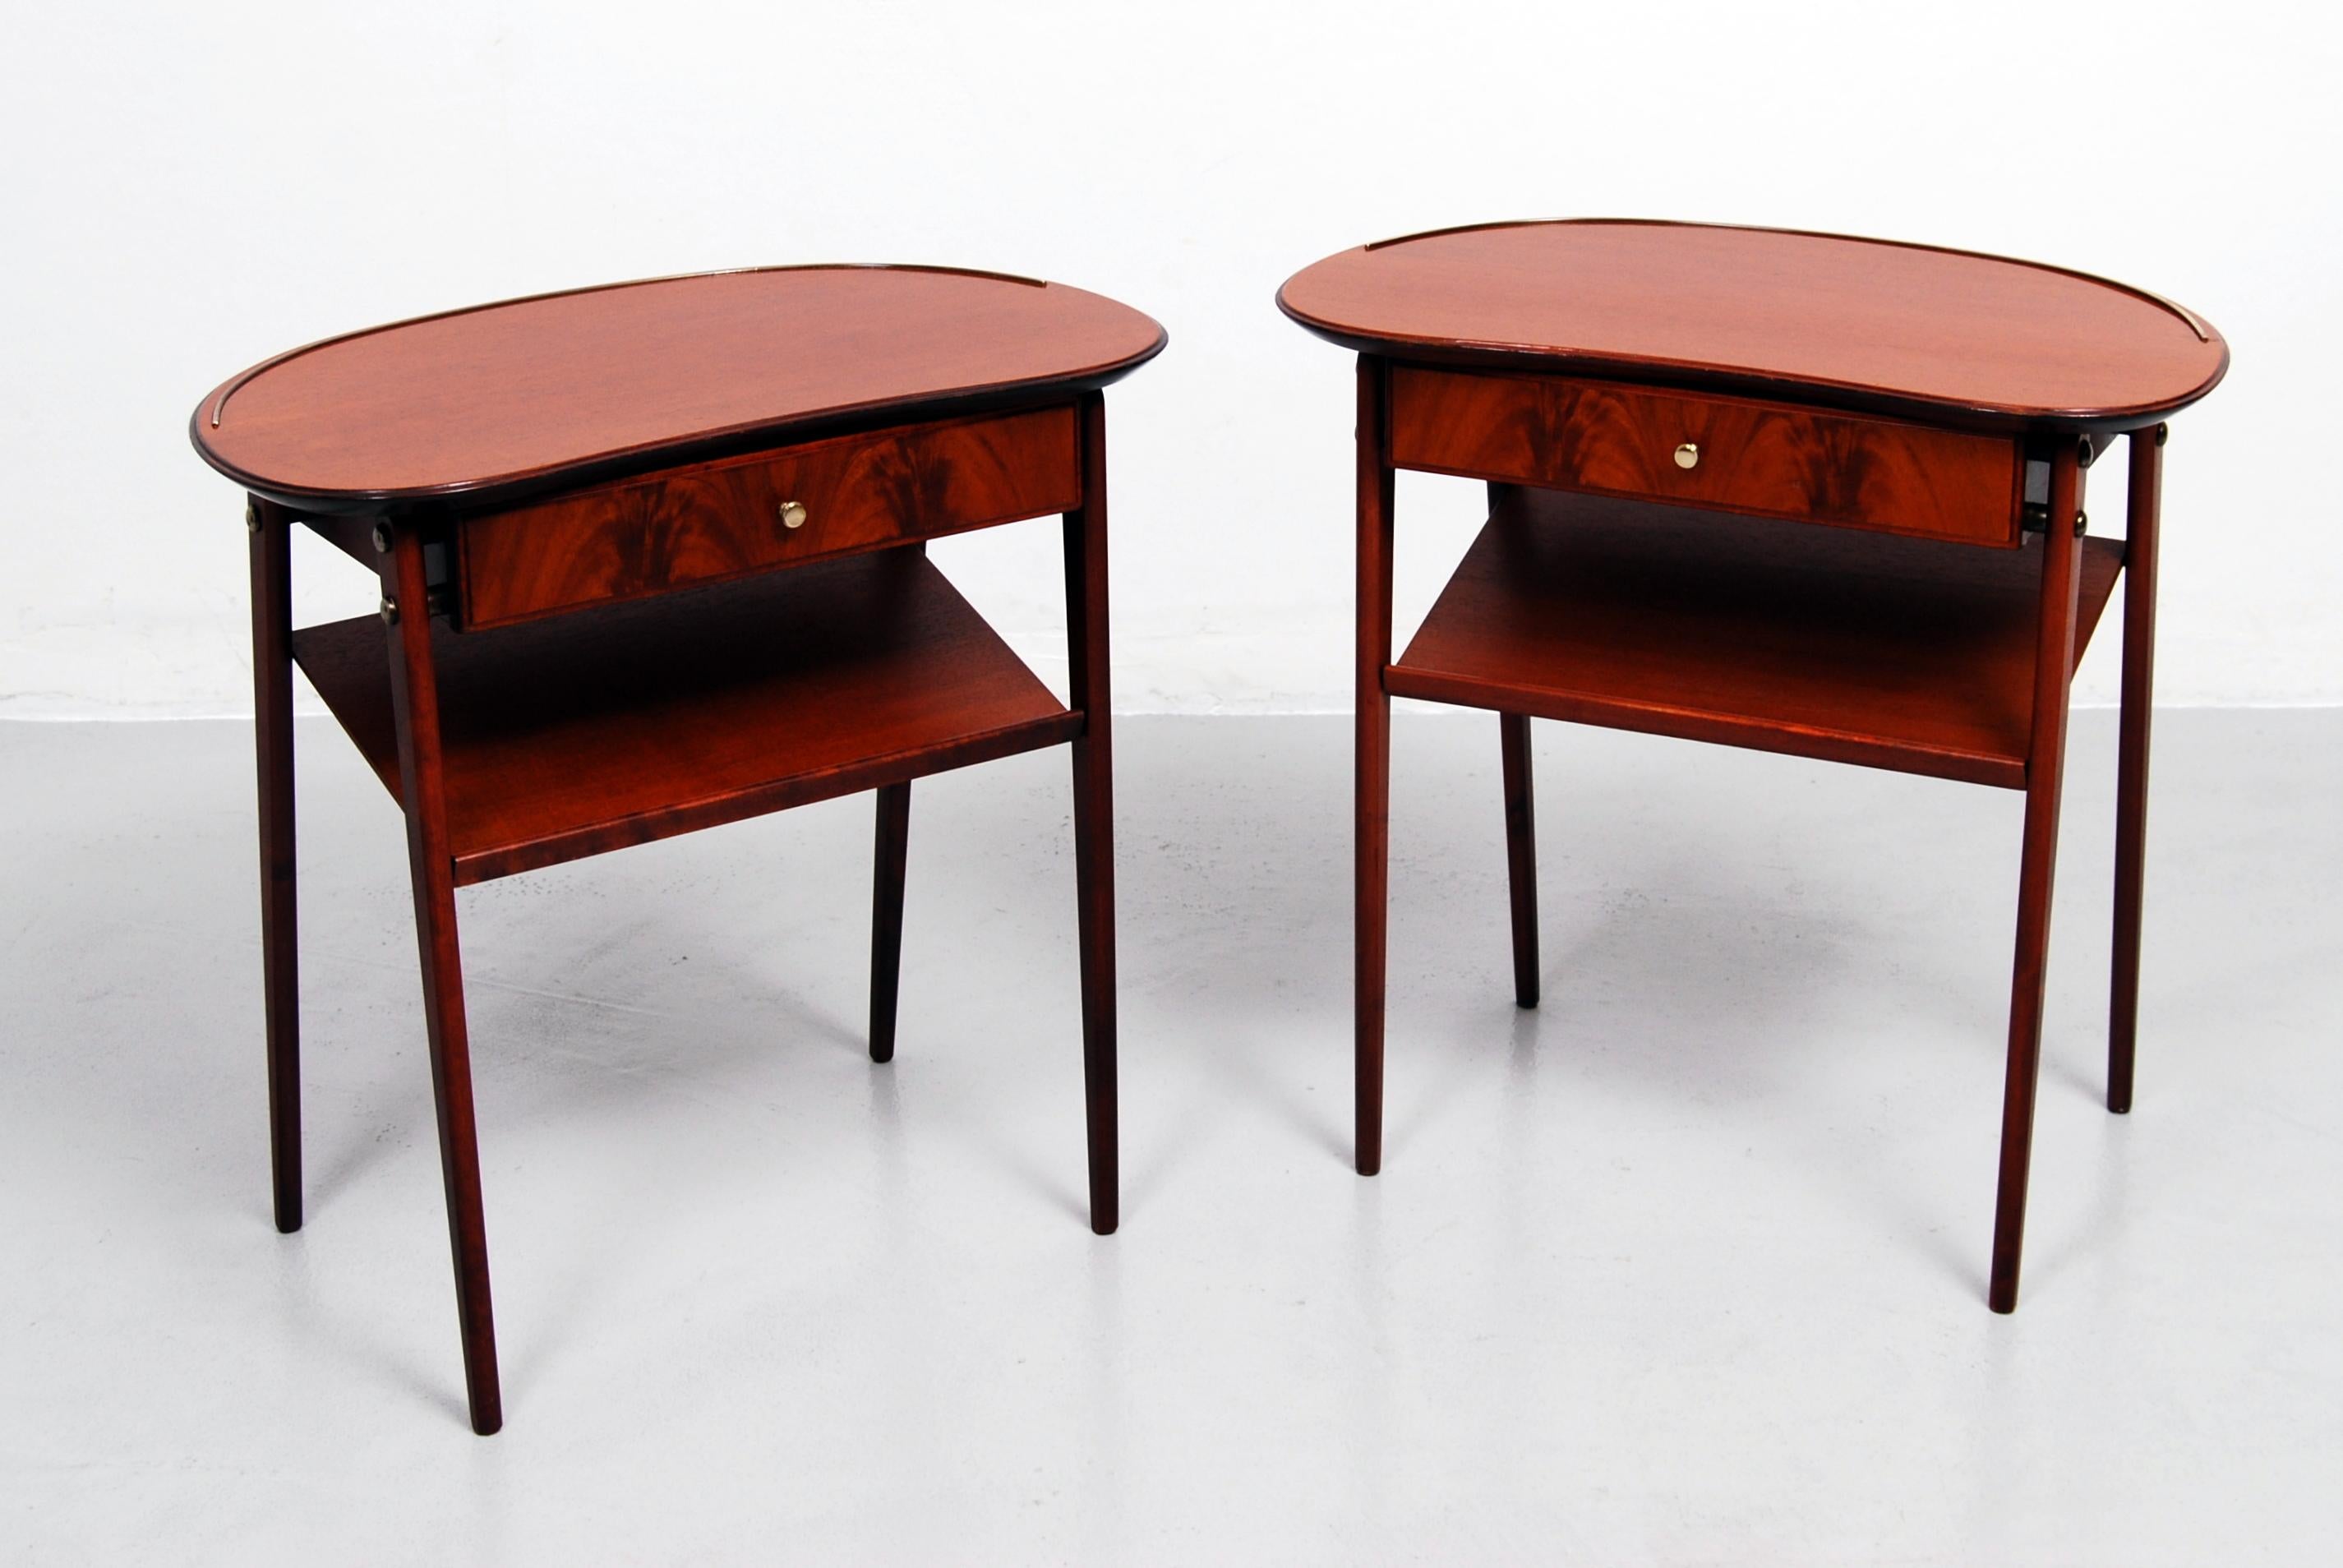 Elegant set of two mahogany and brass nightstands, made in Sweden, 1960s.
  